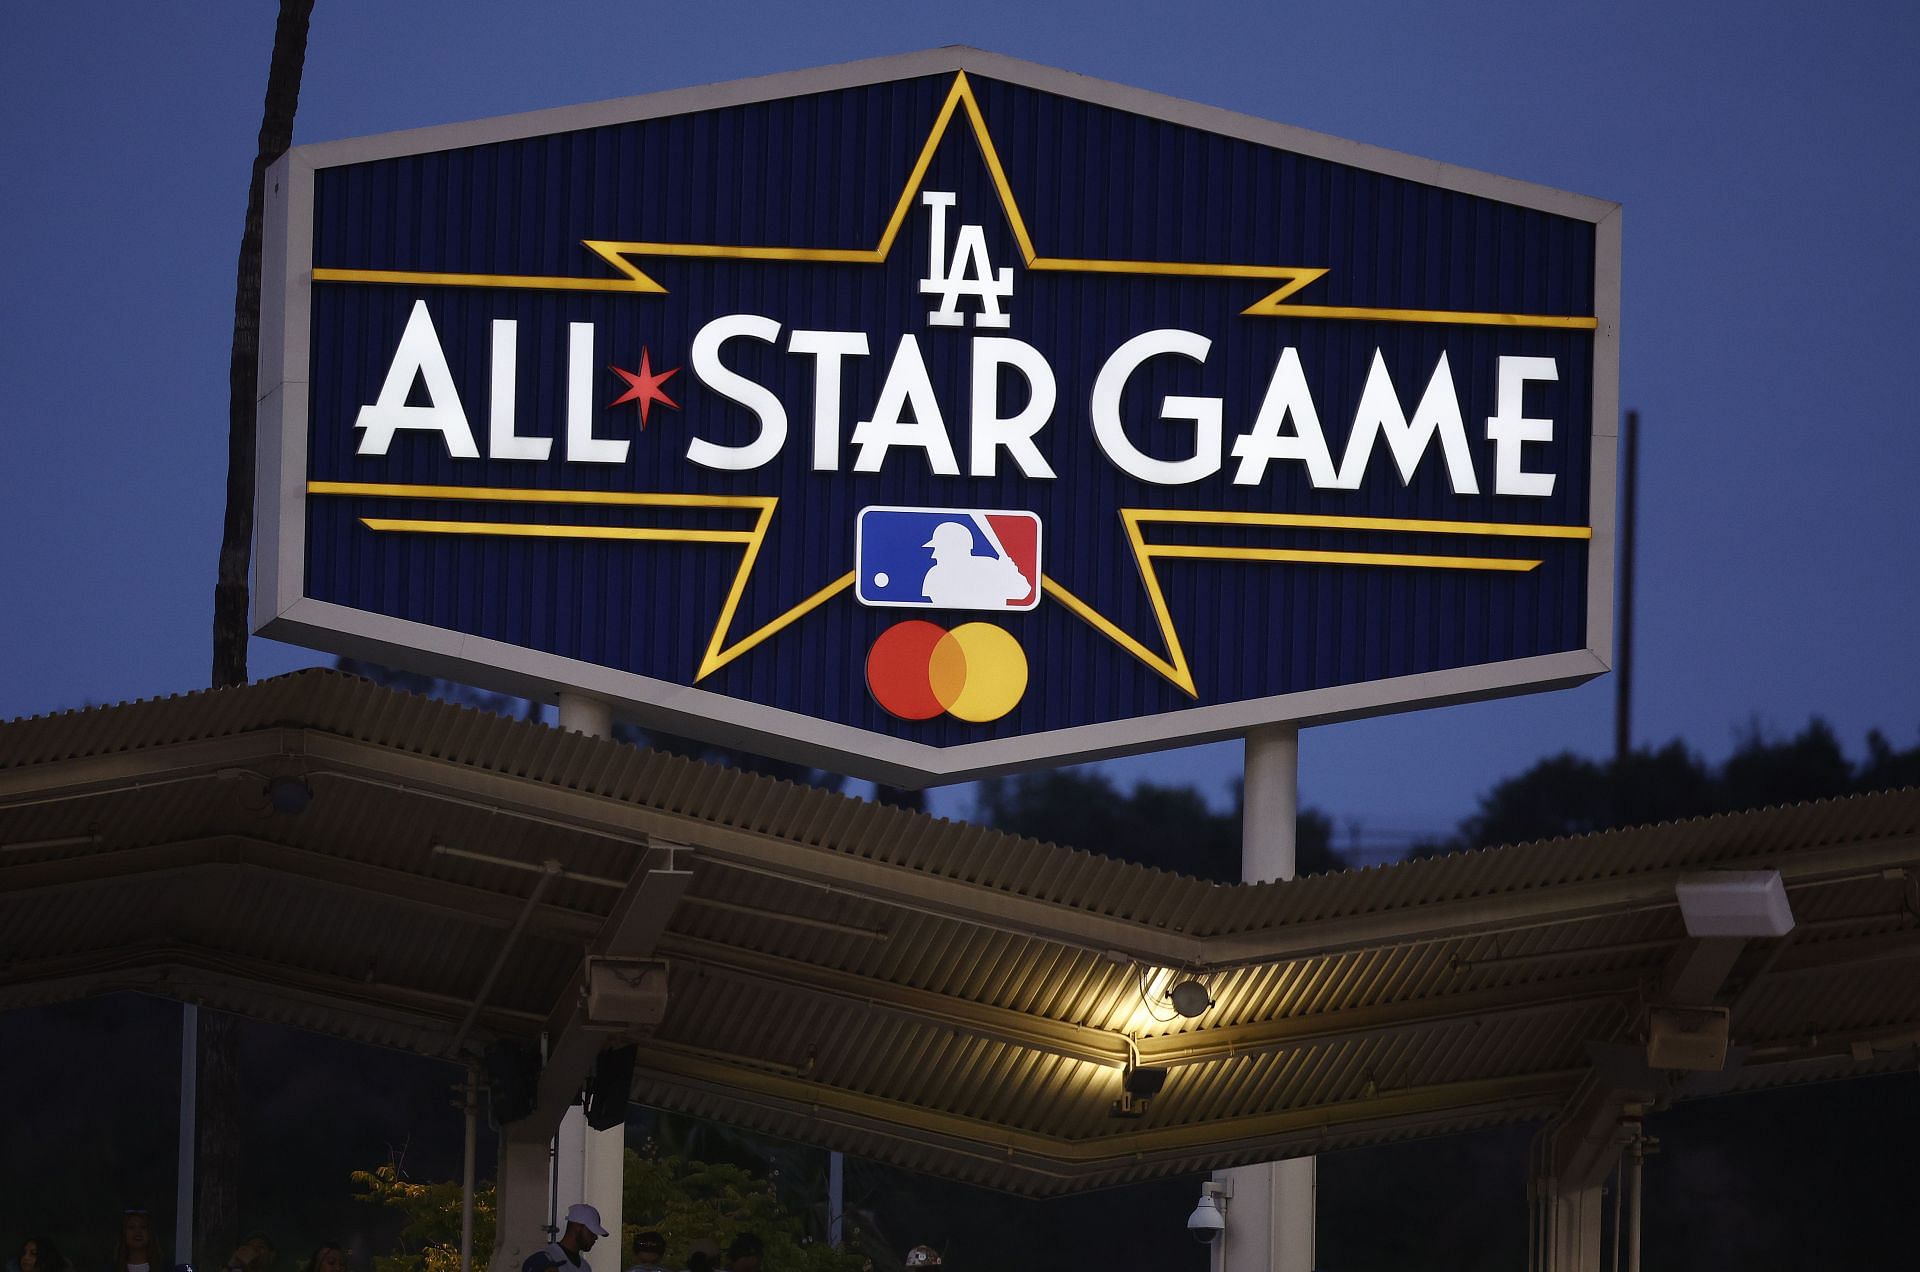 The 2022 All-Star Game will be hosted by the Los Angeles Dodgers.